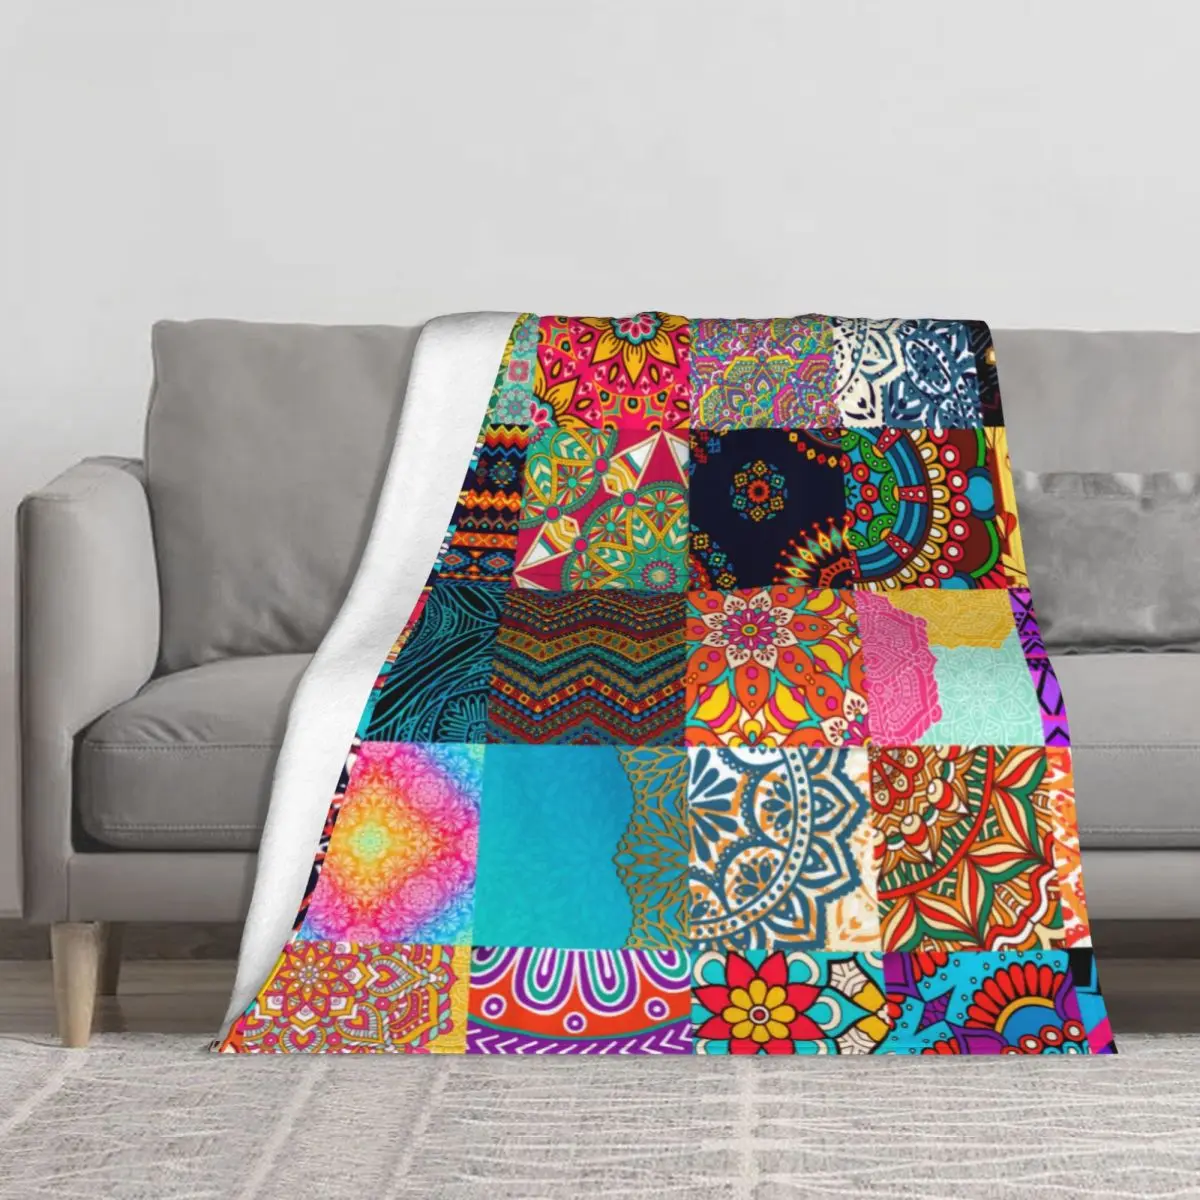 

African Print Patchwork Blanket Vintage Bohemia Customize Knee Throw Blanket On the Bed,Bed,Beds,For Bed,Bedroom Fun Blankets